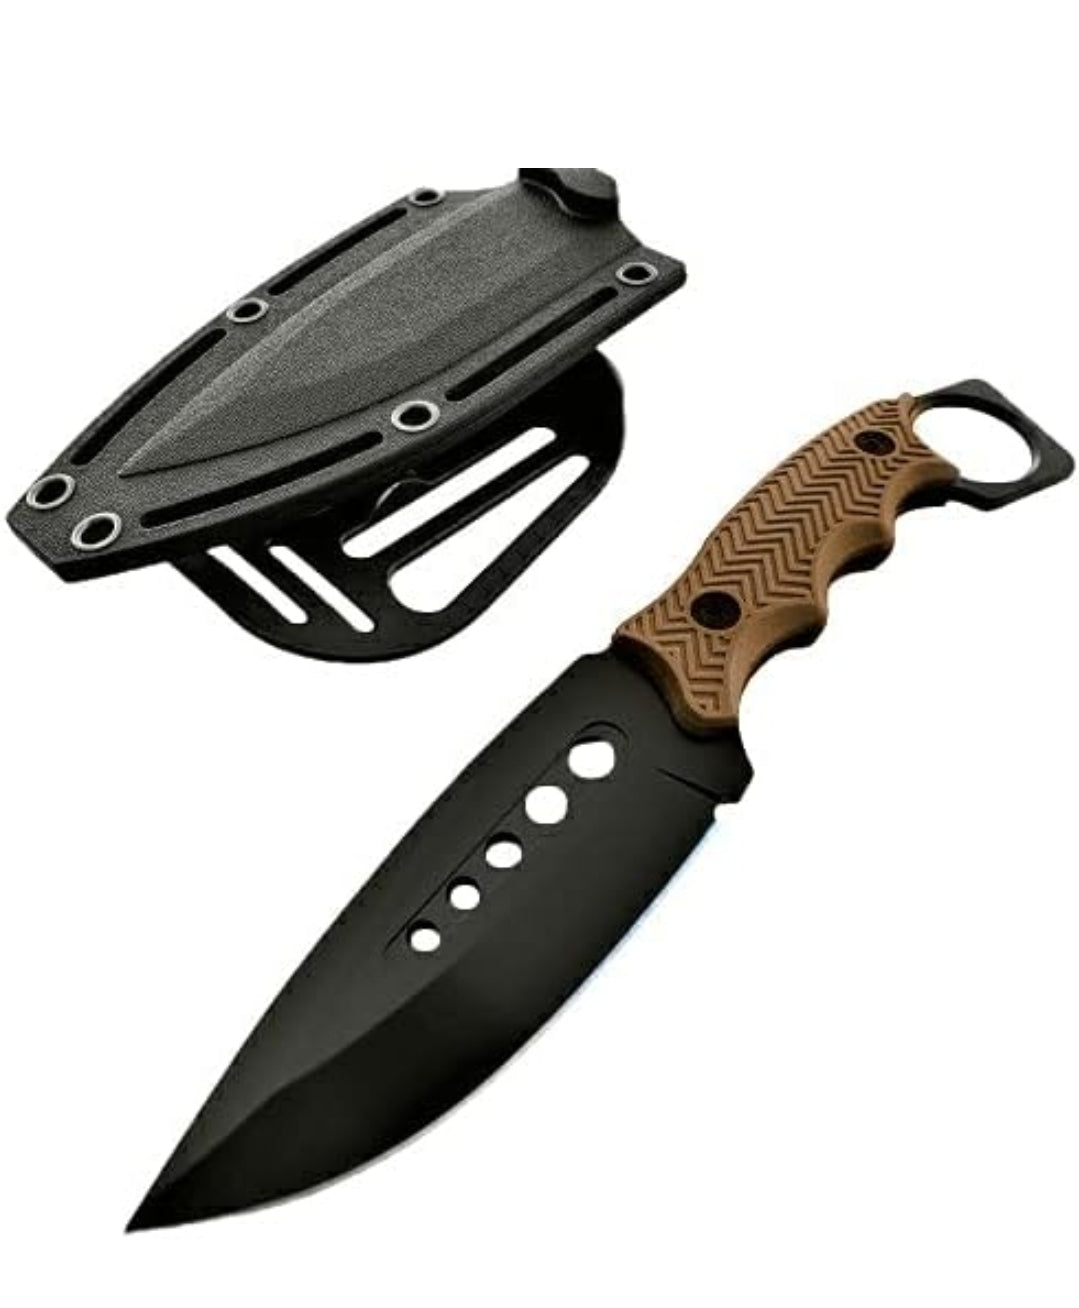 Roughneck Tactical Knife [brown]